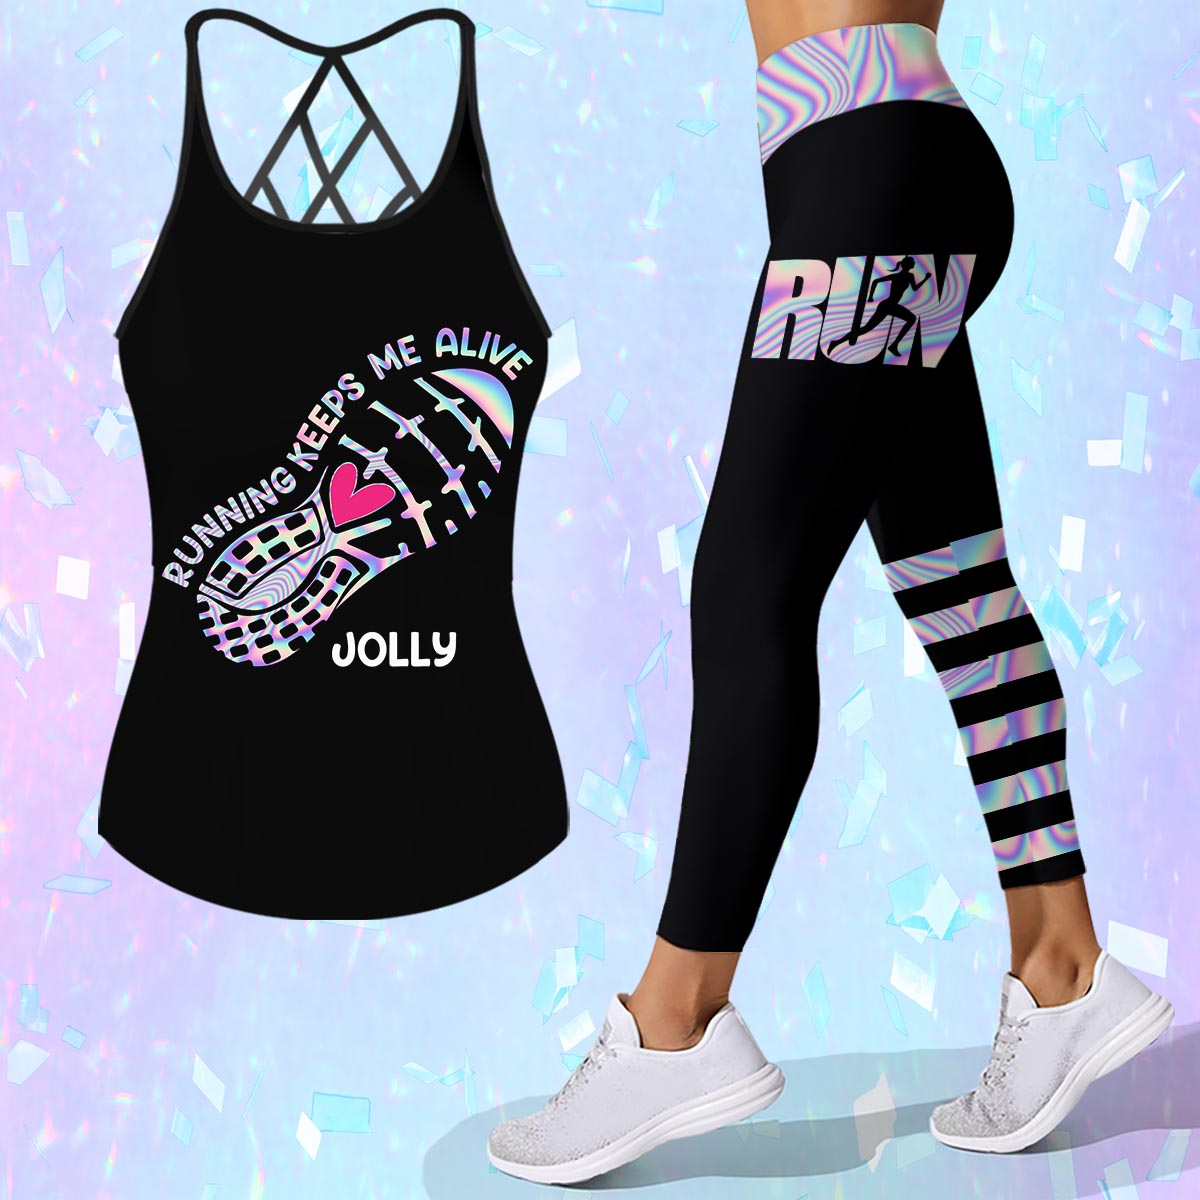 Running Keeps Me Alive - Personalized Running Cross Tank Top and Leggings